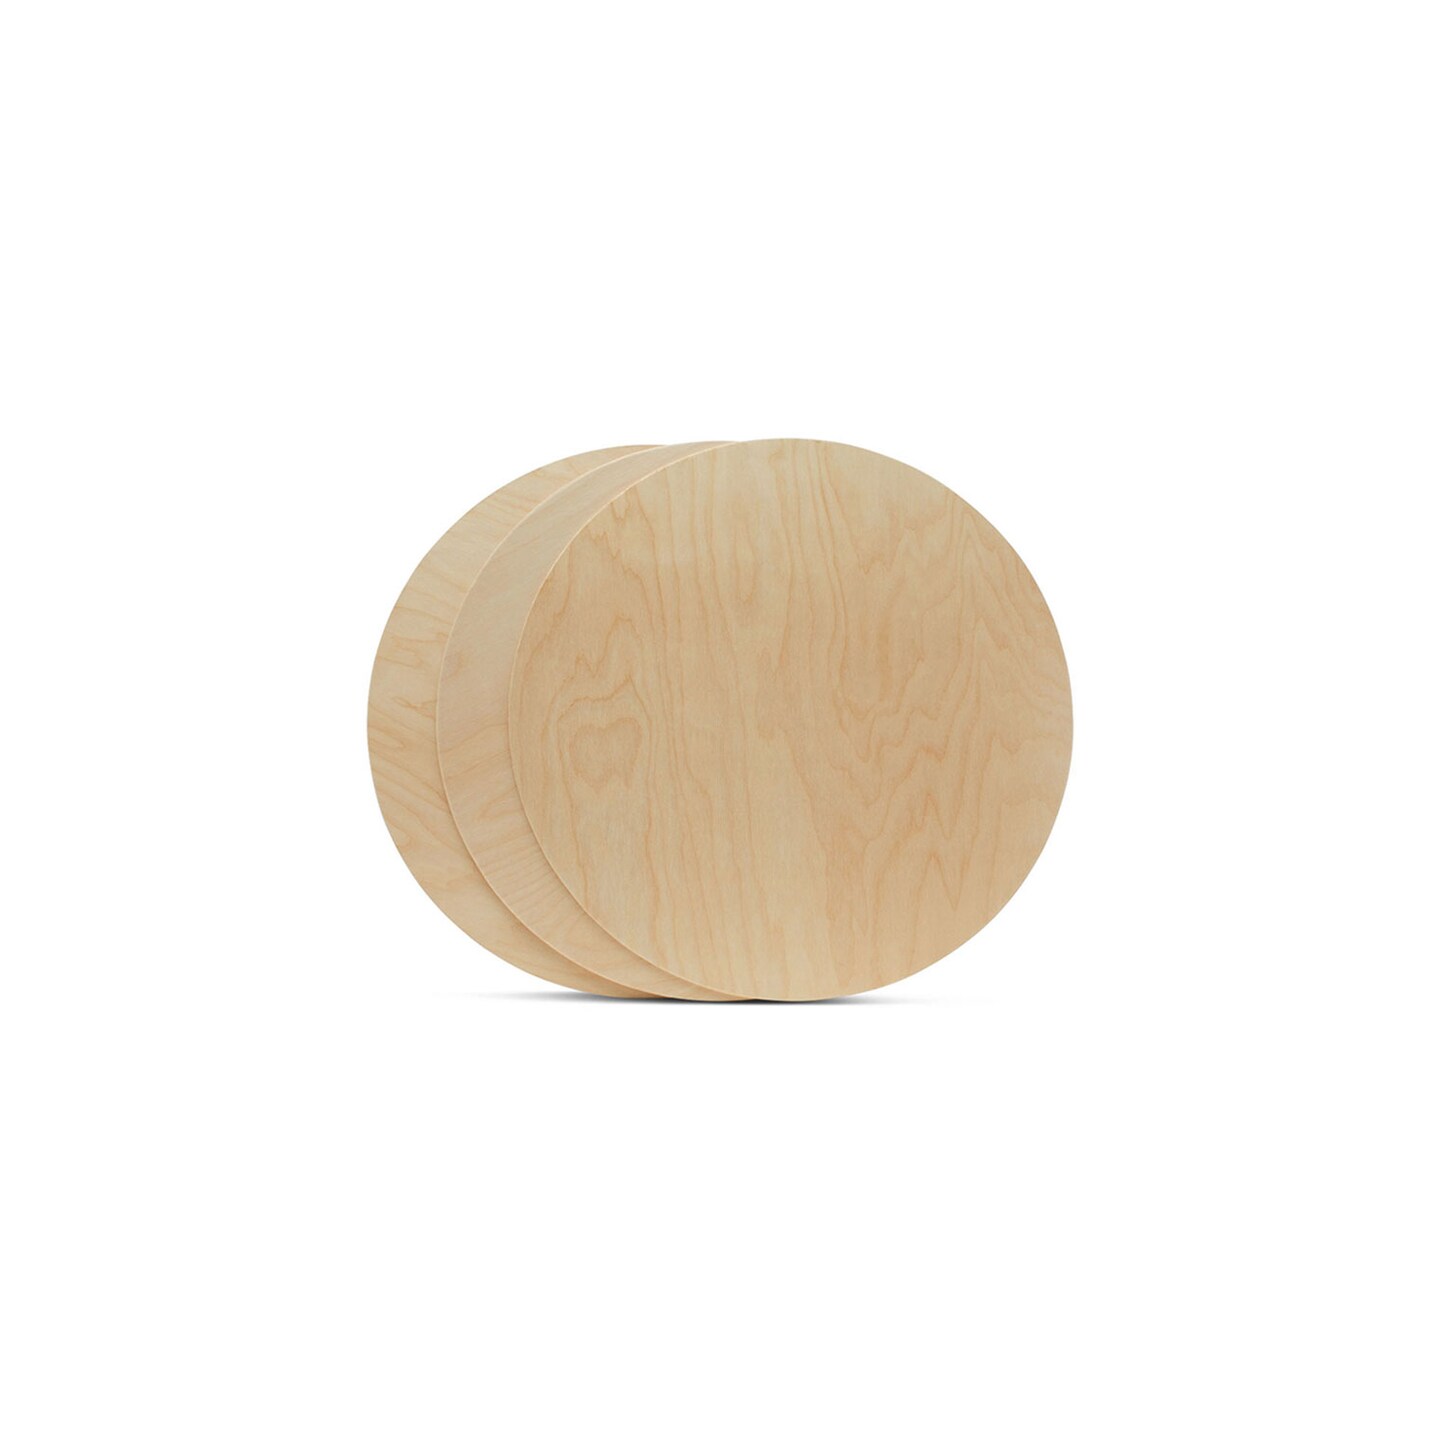 Wood Circles 12 inch, 1/8 Inch Thick, Birch Plywood Discs, Pack of 10  Unfinished Wood Circles for Crafts, Wood Rounds by Woodpeckers